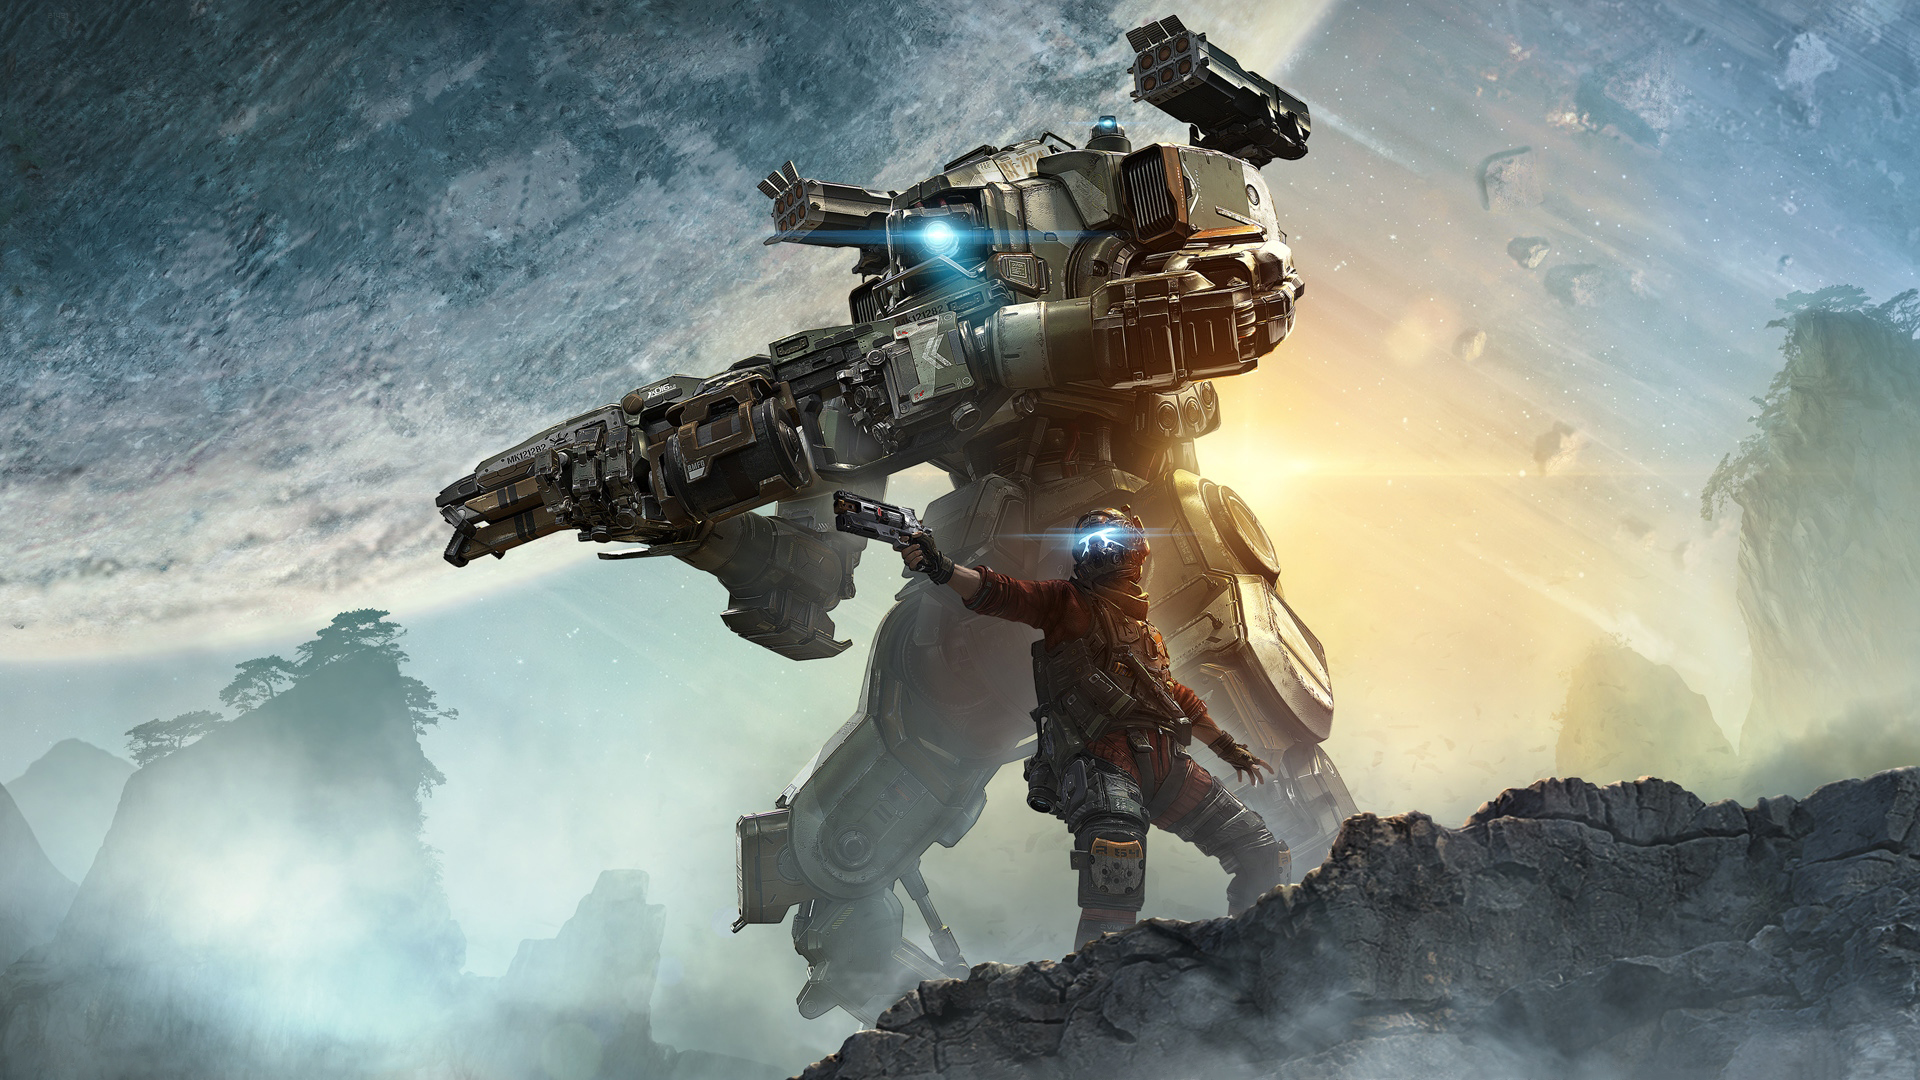 Pilot Primary Mods - Official Titanfall 2 Wiki